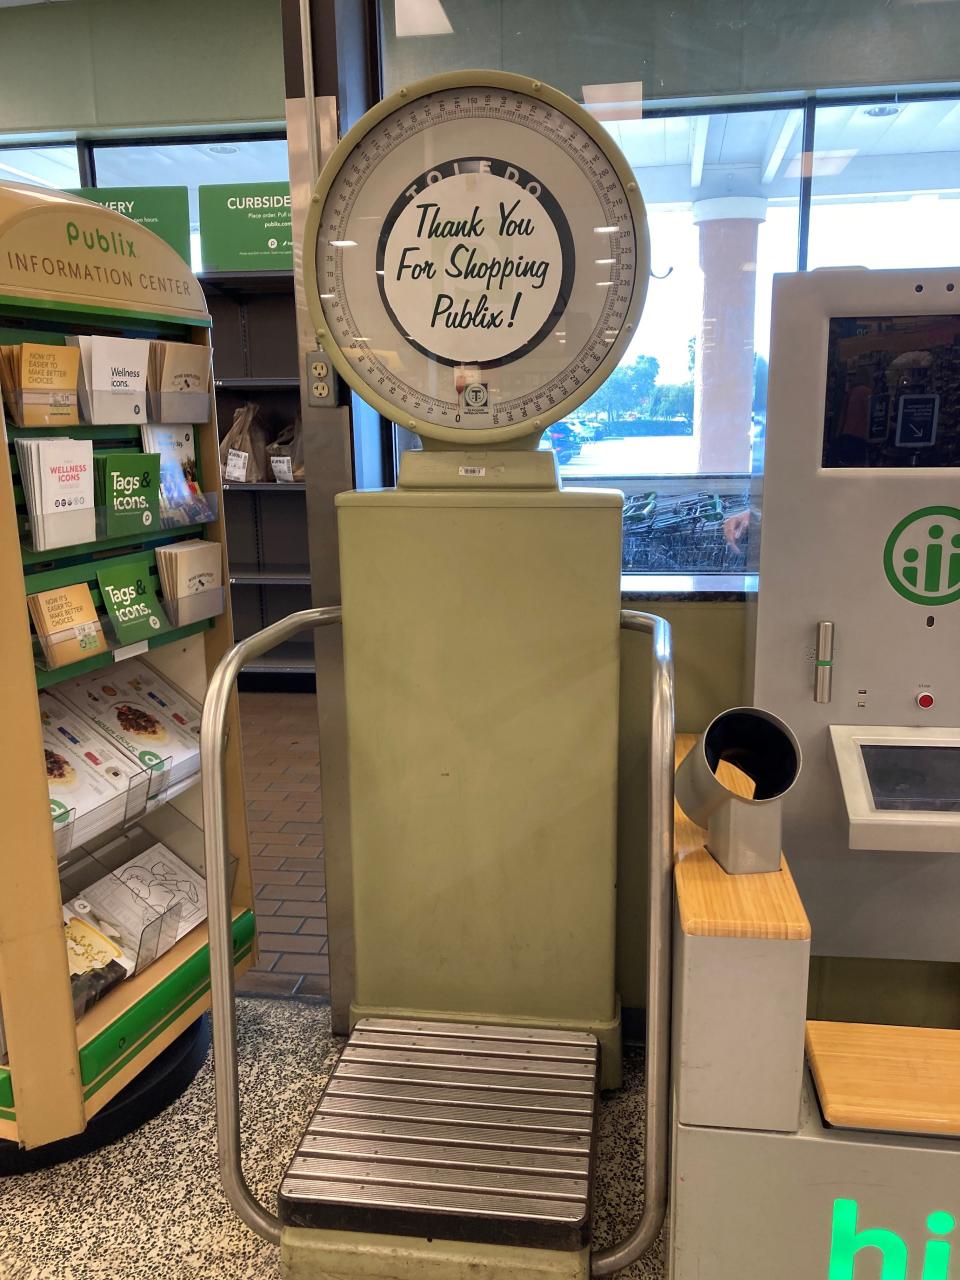 The Publix scale has been part of the store since the beginning but is no longer being made.